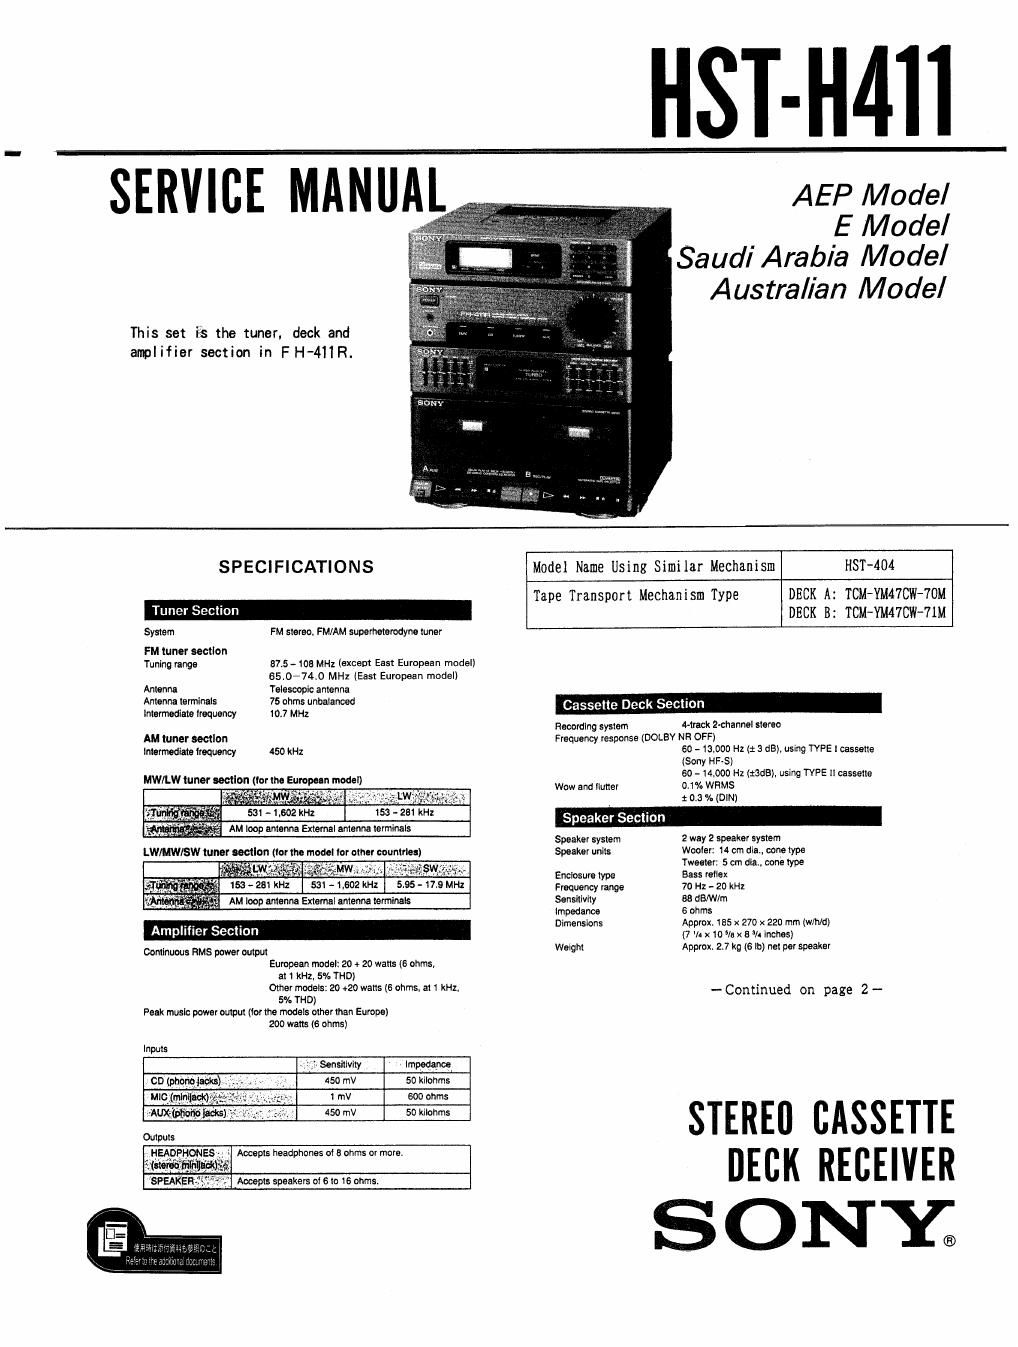 sony hsth 411 service manual